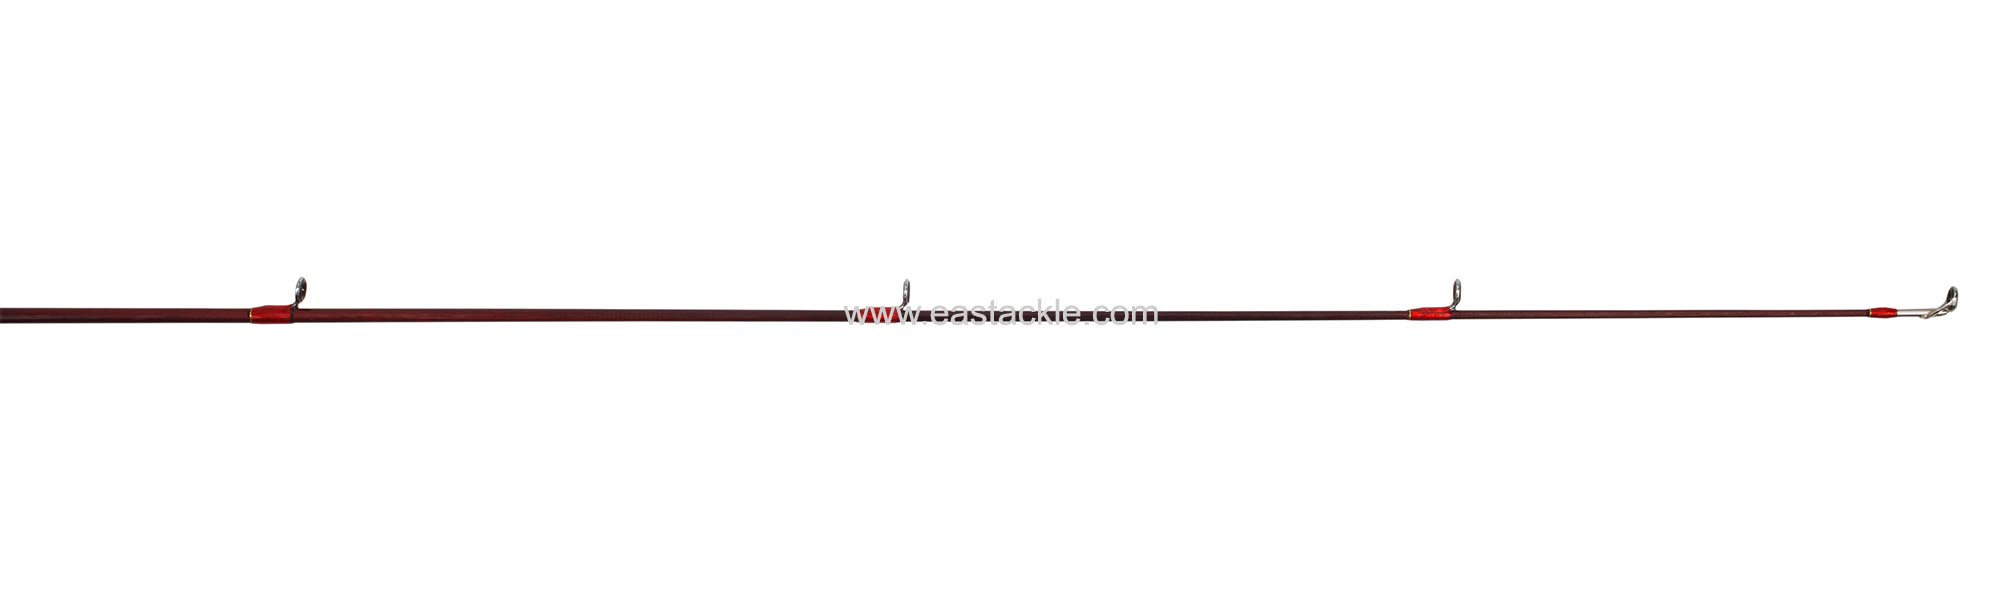 Rapala - Vaaksy - 80th Anniversary - VAC662M - Bait Casting Rod - Tip Section (Side View) | Eastackle